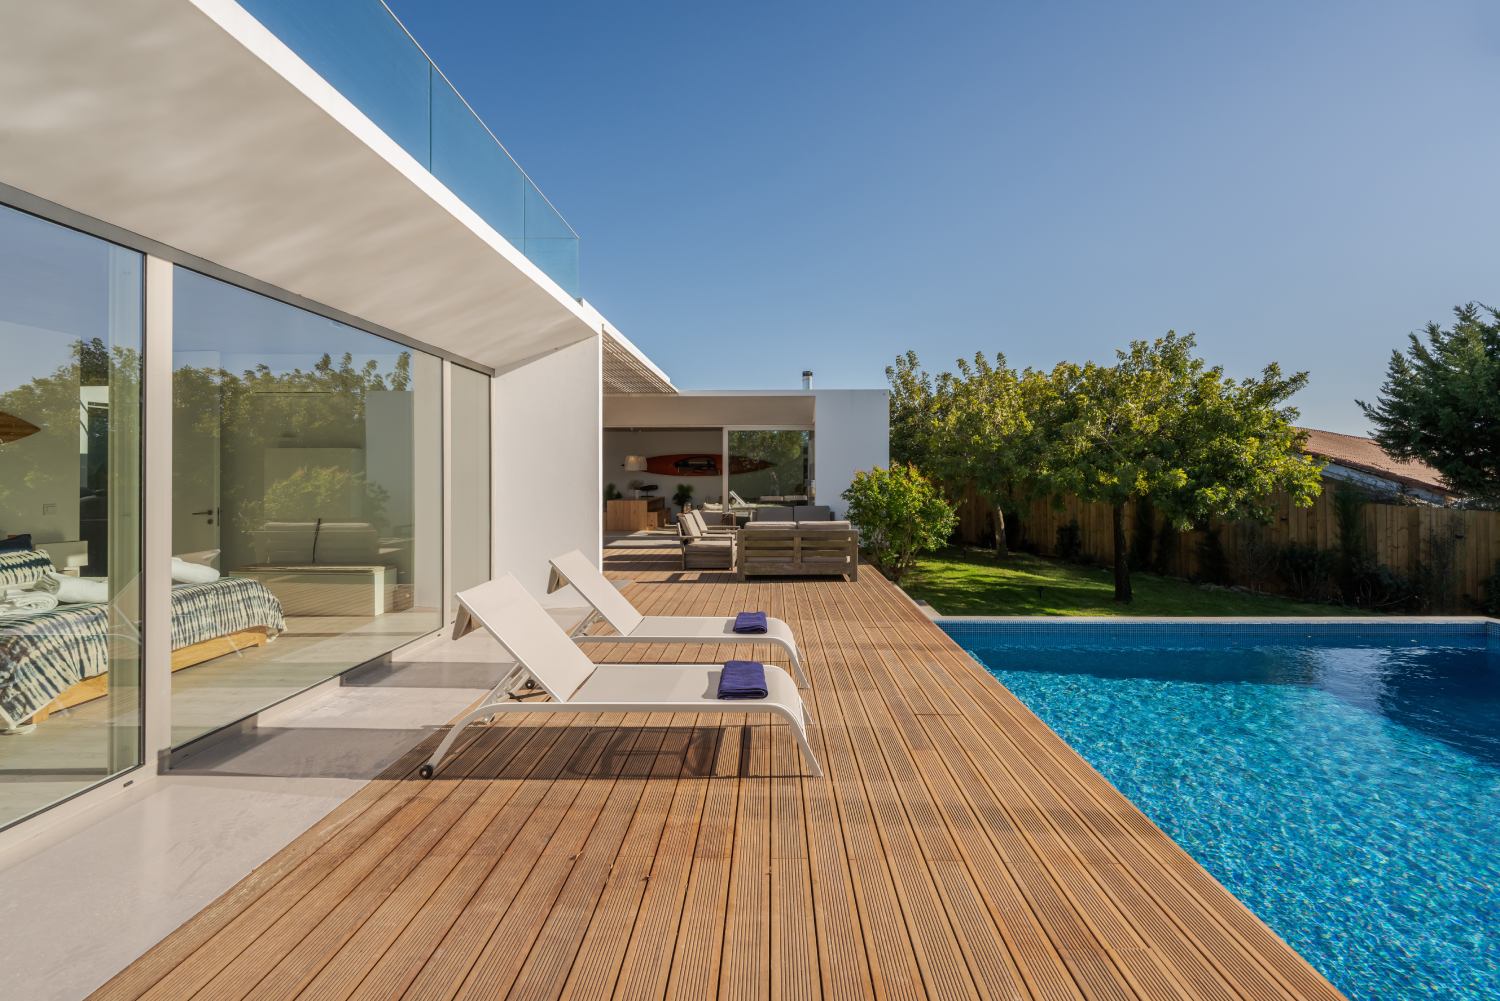 Elevate Your Pool Area To The Next Level With These Pool Deck Ideas FEATURED